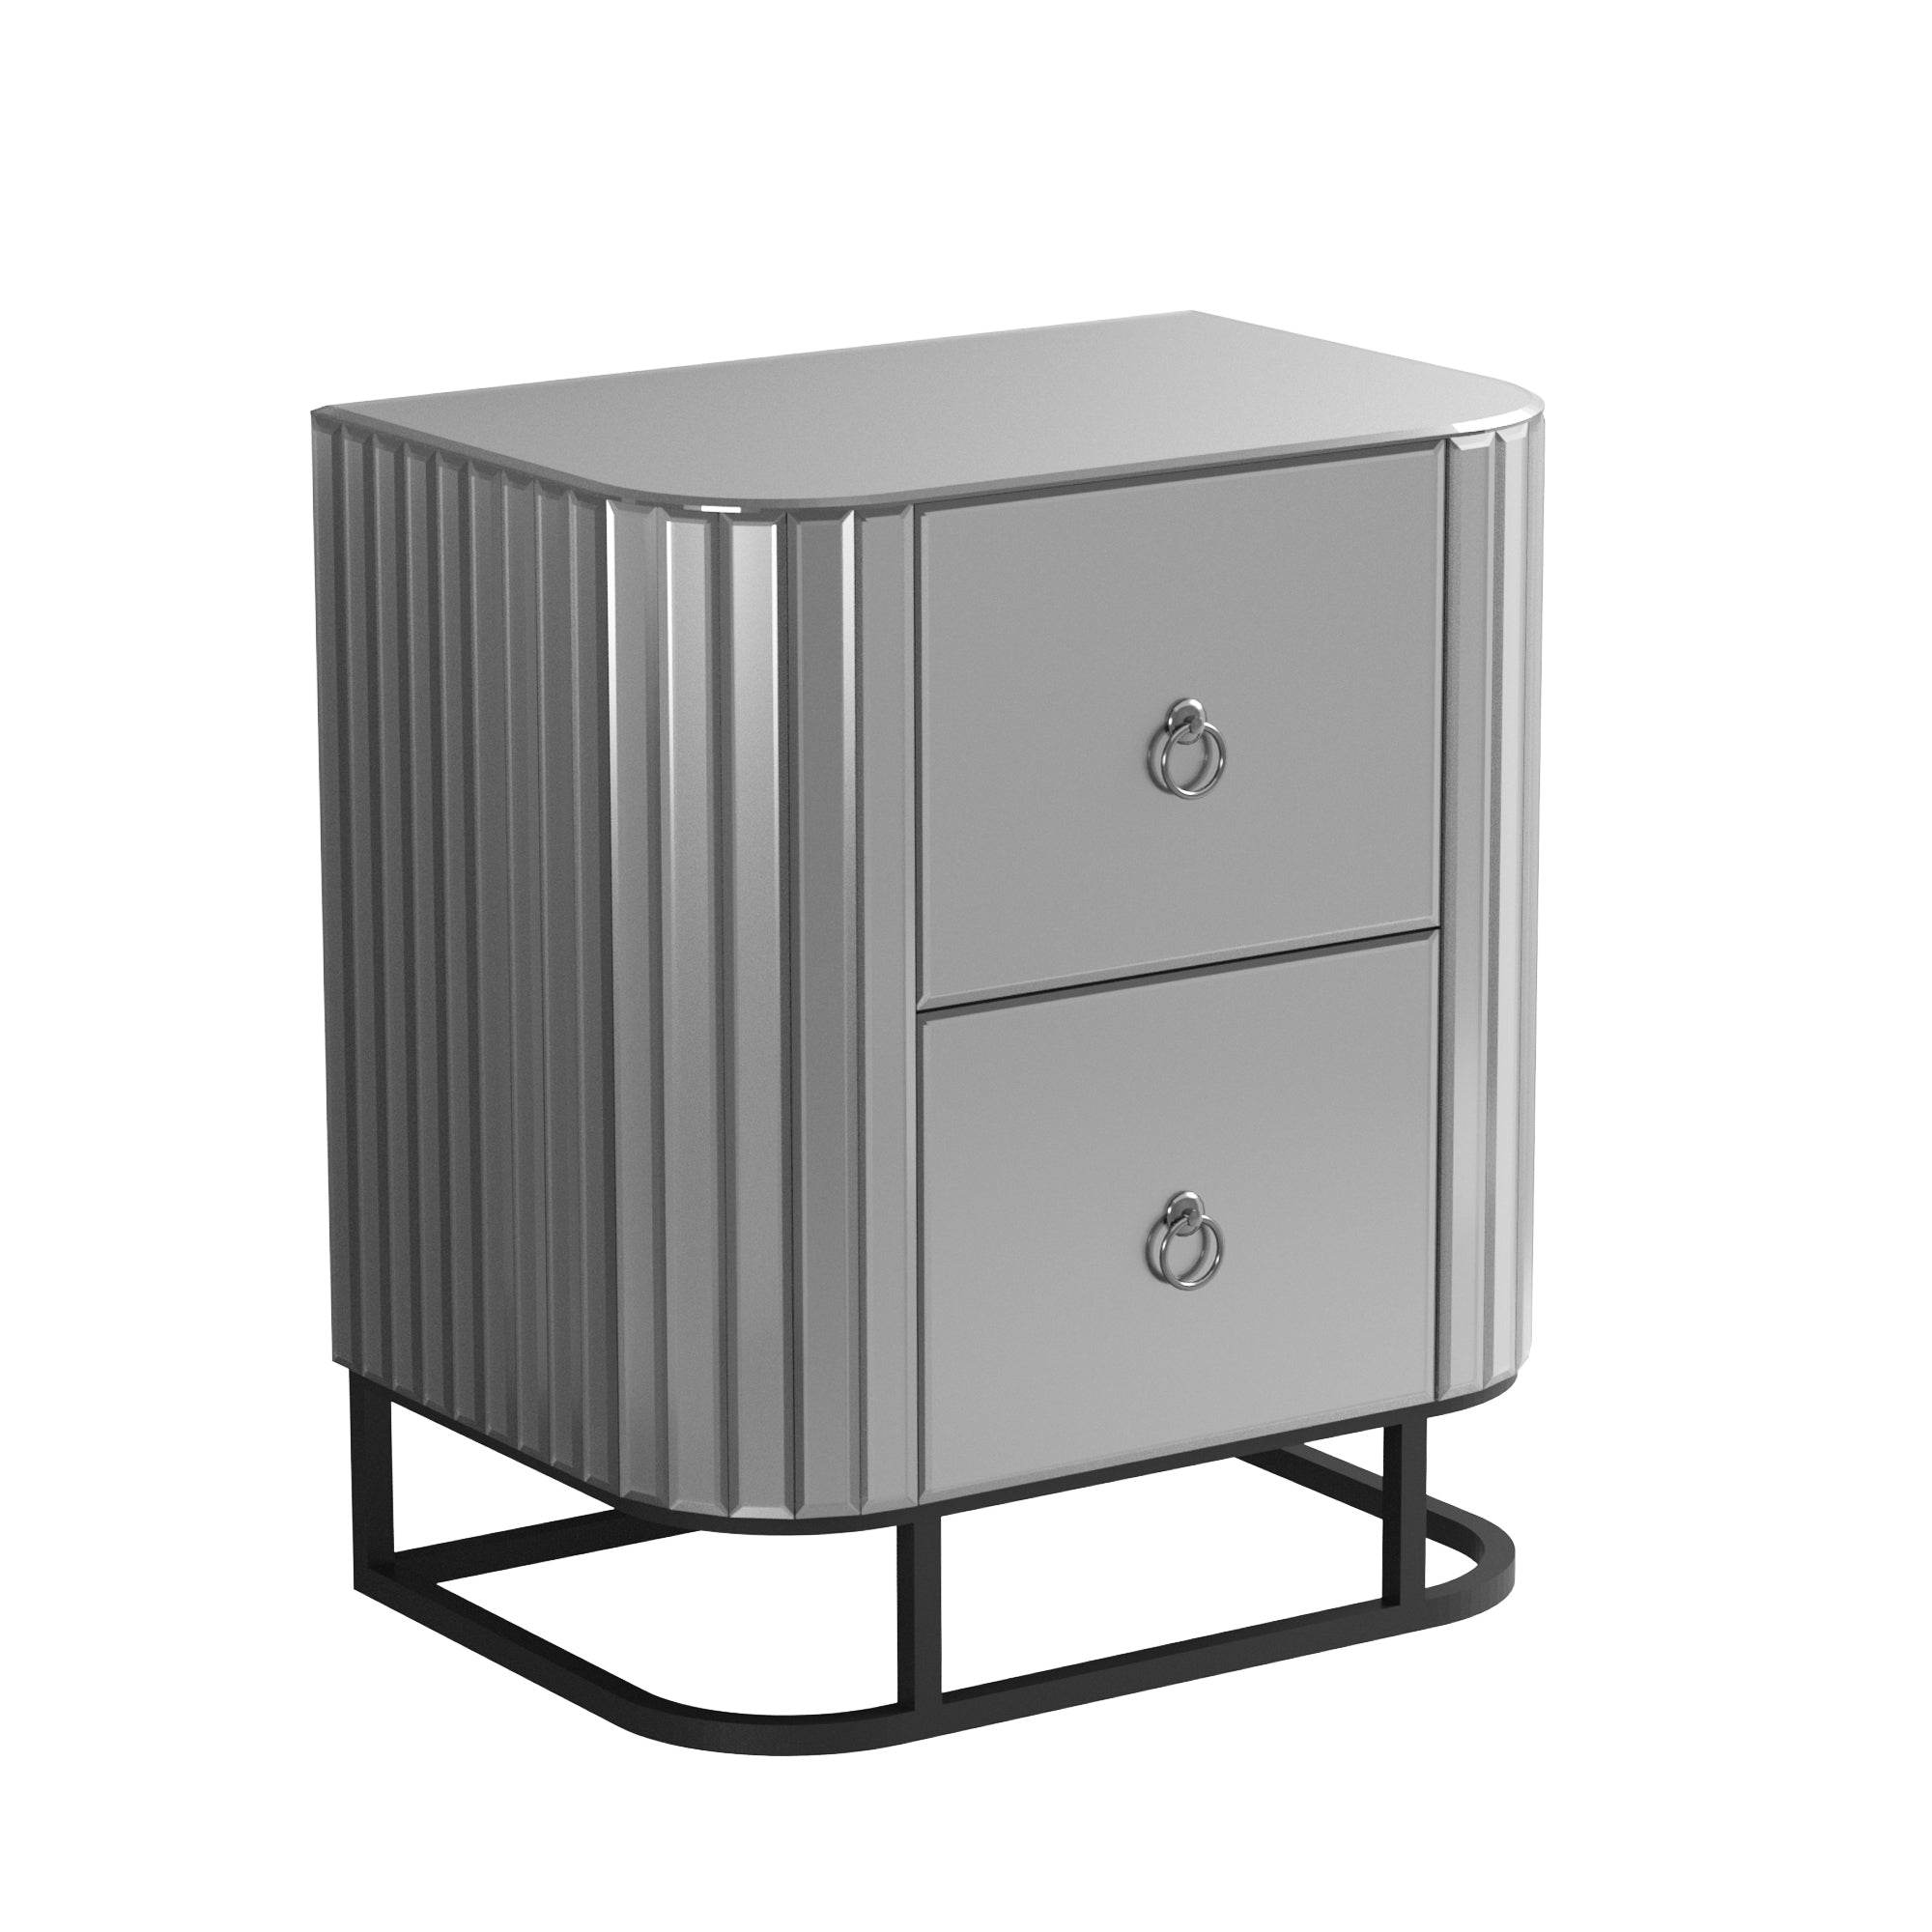 Strip Mirror Iron Bedside Table (Gray)